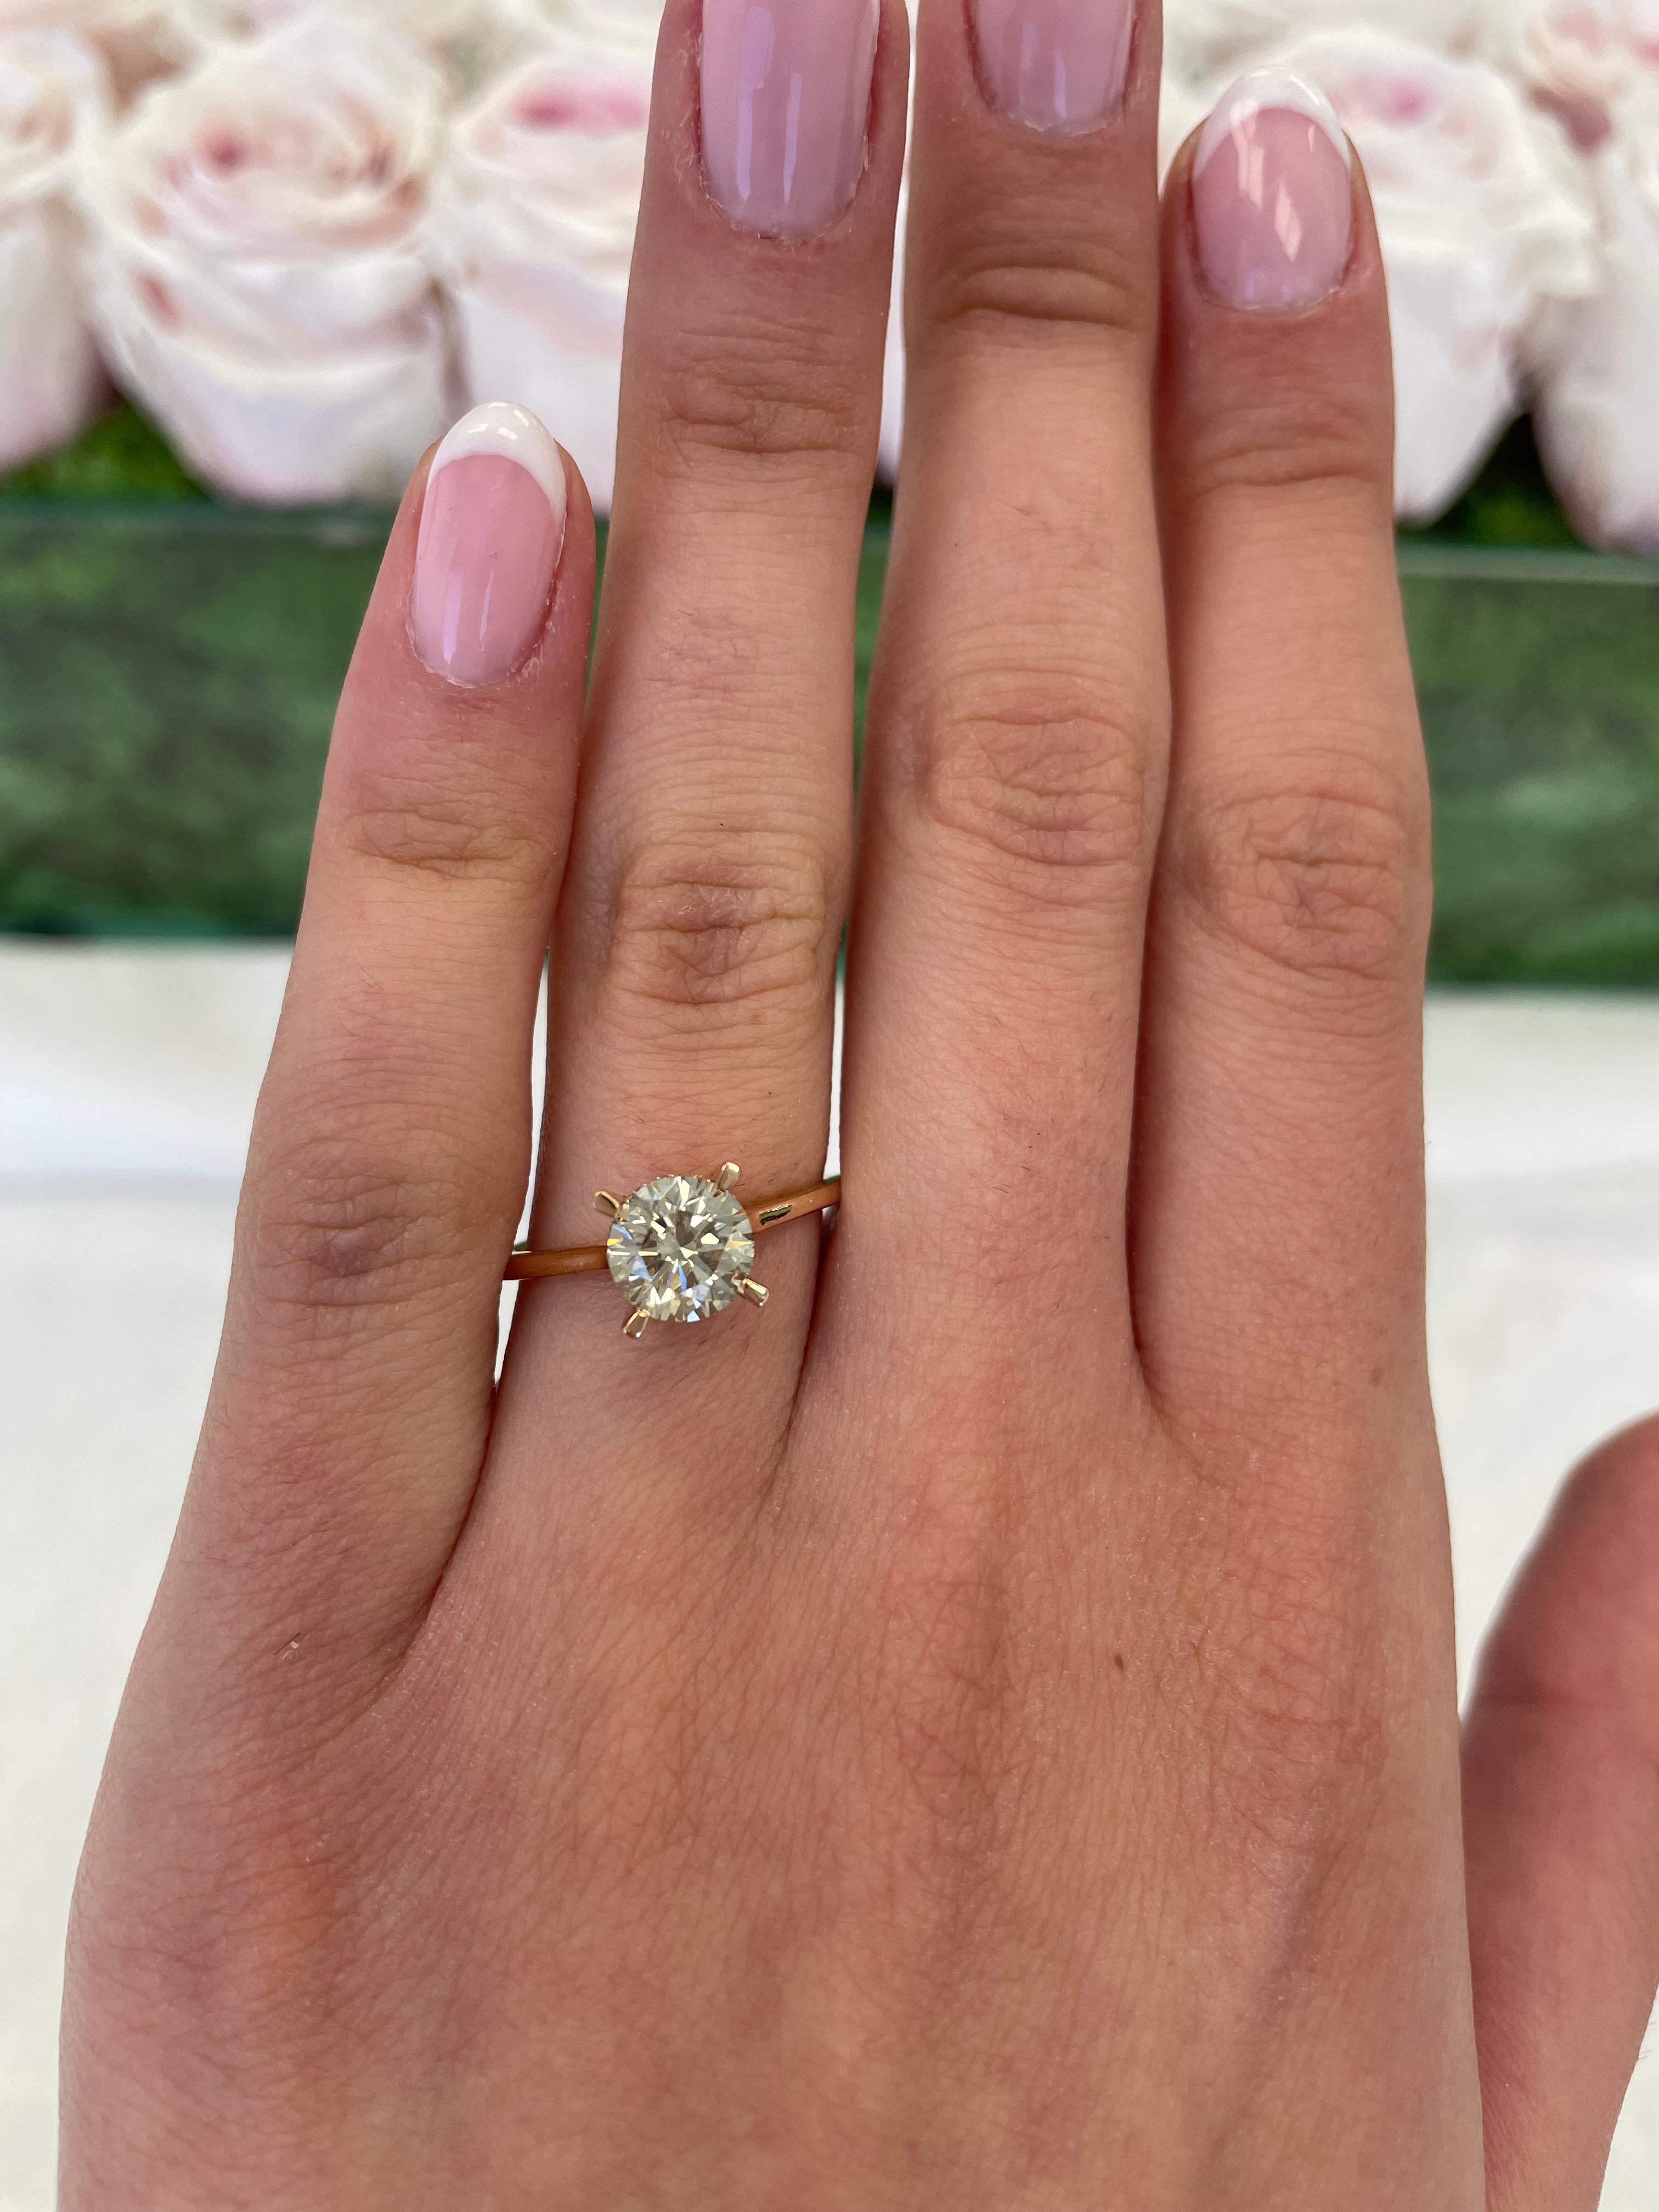 Classic solitaire diamond engagement ring with hidden halo.
1.40 carats total diamond weight.
1.31 carat round brilliant diamond, approximately L/M color grade and SI clarity grade. Complimented by 0.09 carats of round brilliant diamonds,